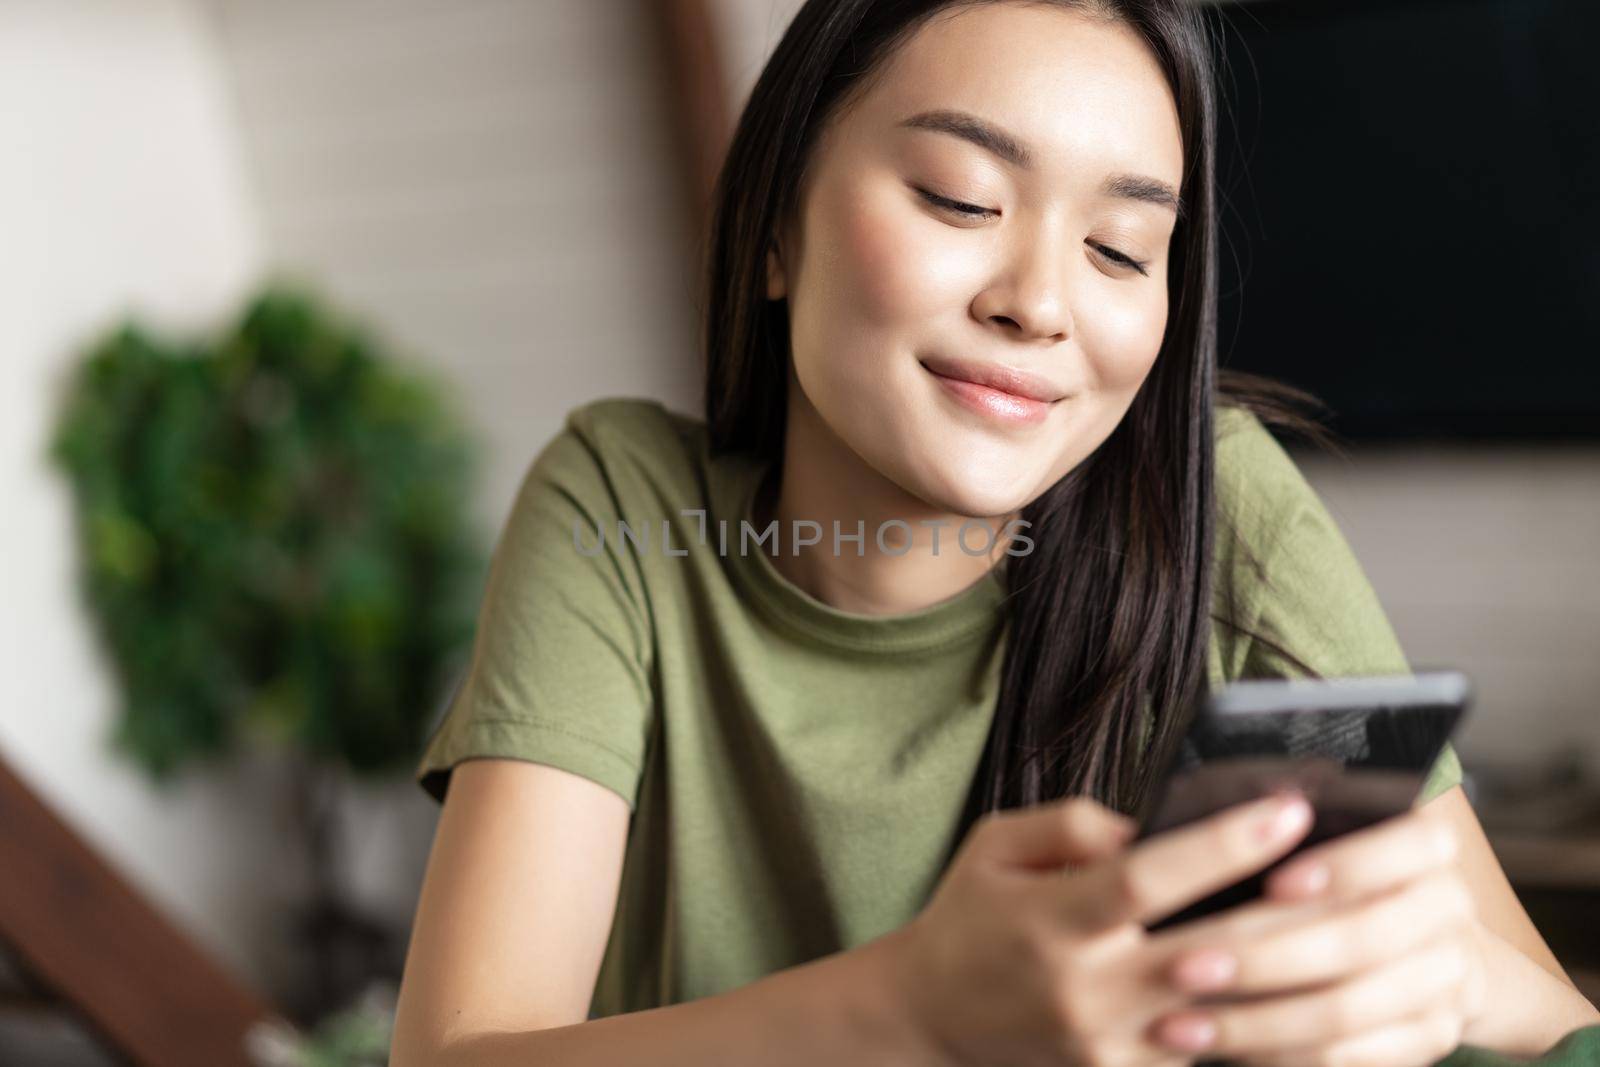 Smiling korean woman looking at mobile phone chat app with dreamy face, sitting at home on couch.